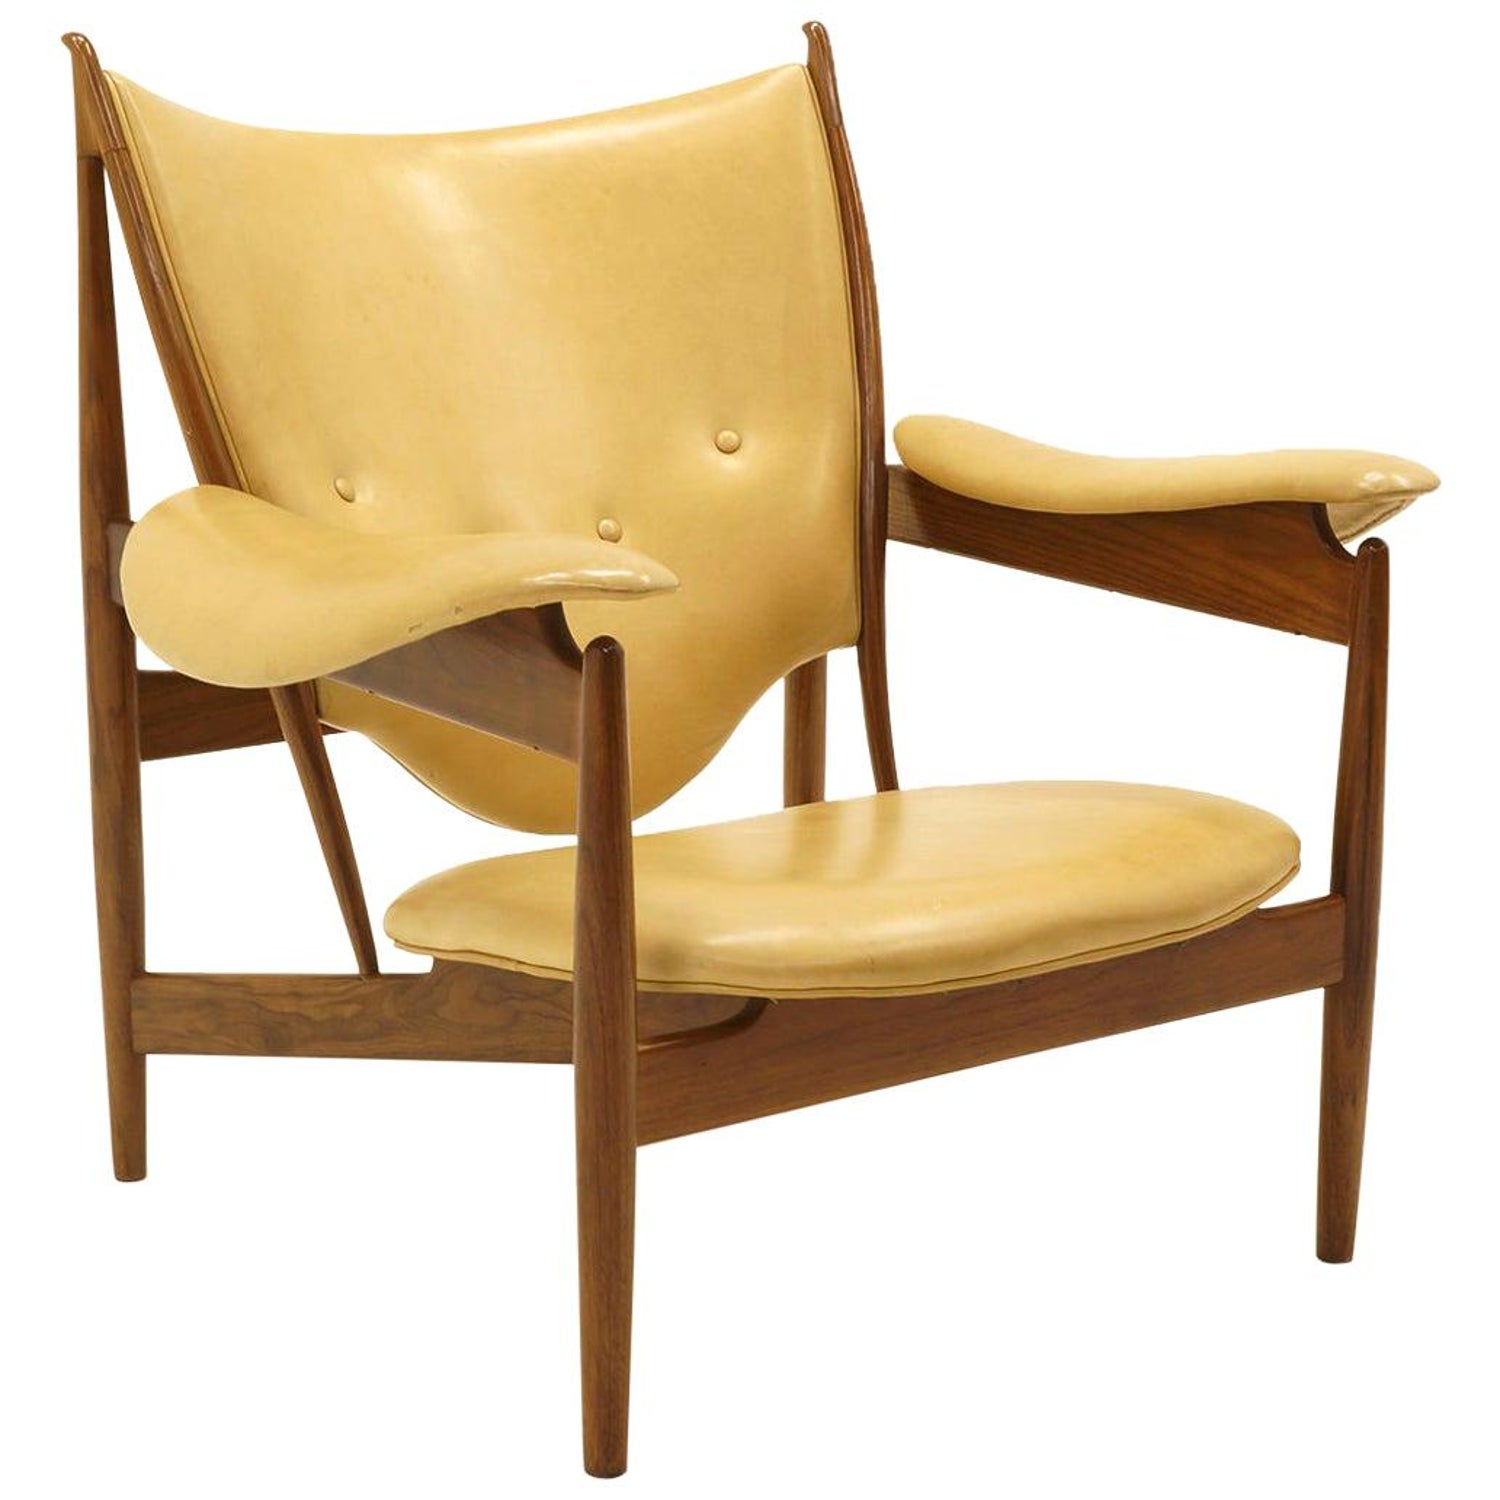 Chieftain Chairs 9 For Sale On 1stdibs